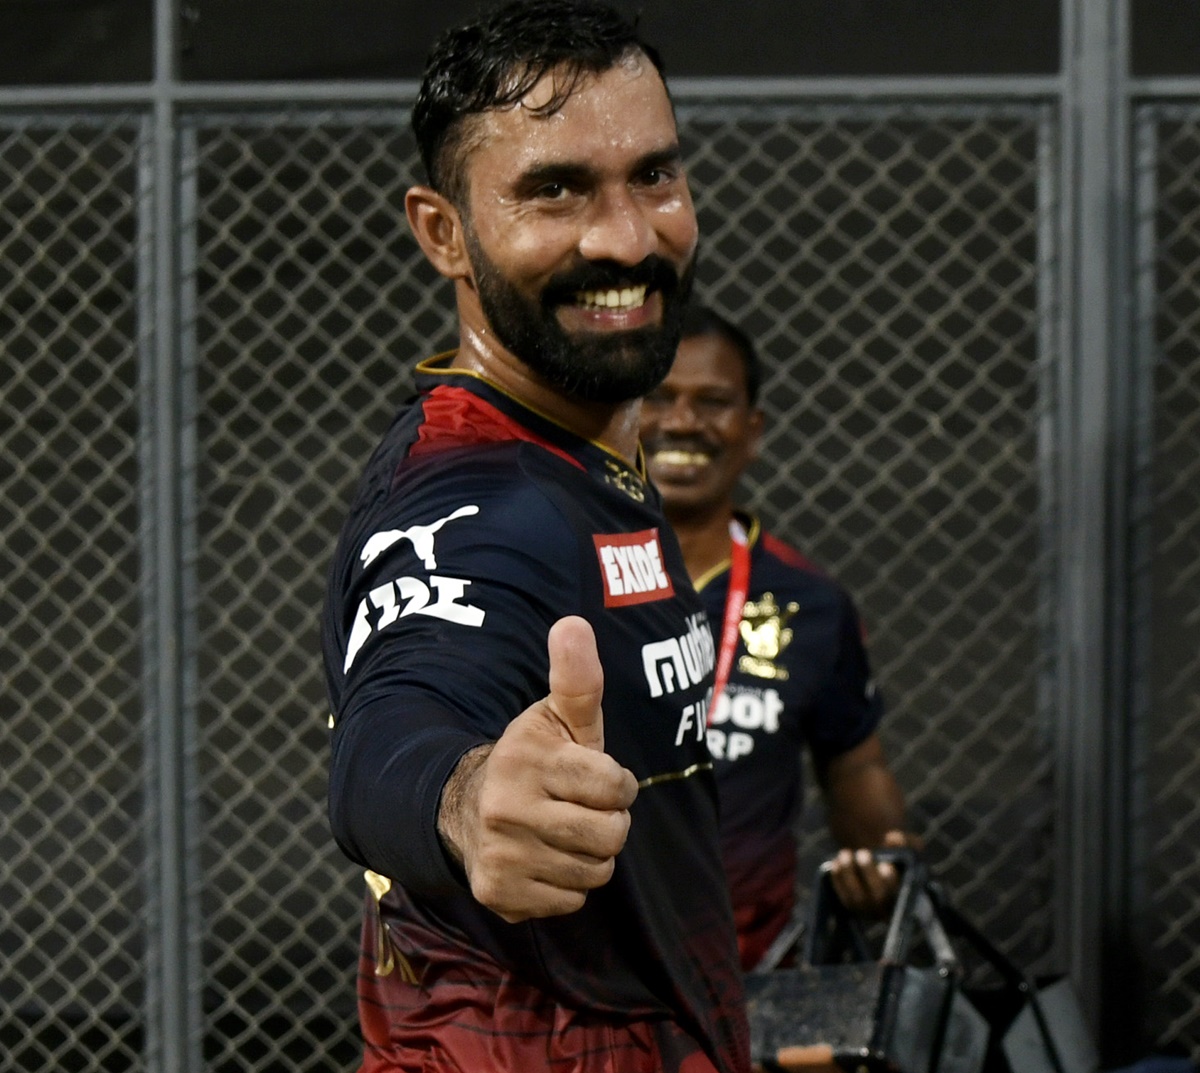 Star Sports - Dinesh Karthik needs 4⃣5⃣ runs to become the highest  run-scorer in #TATAIPL history vs #RajasthanRoyals! Send in your cheers for  the #RCB keeper to clinch this record in #Qualifier2. #